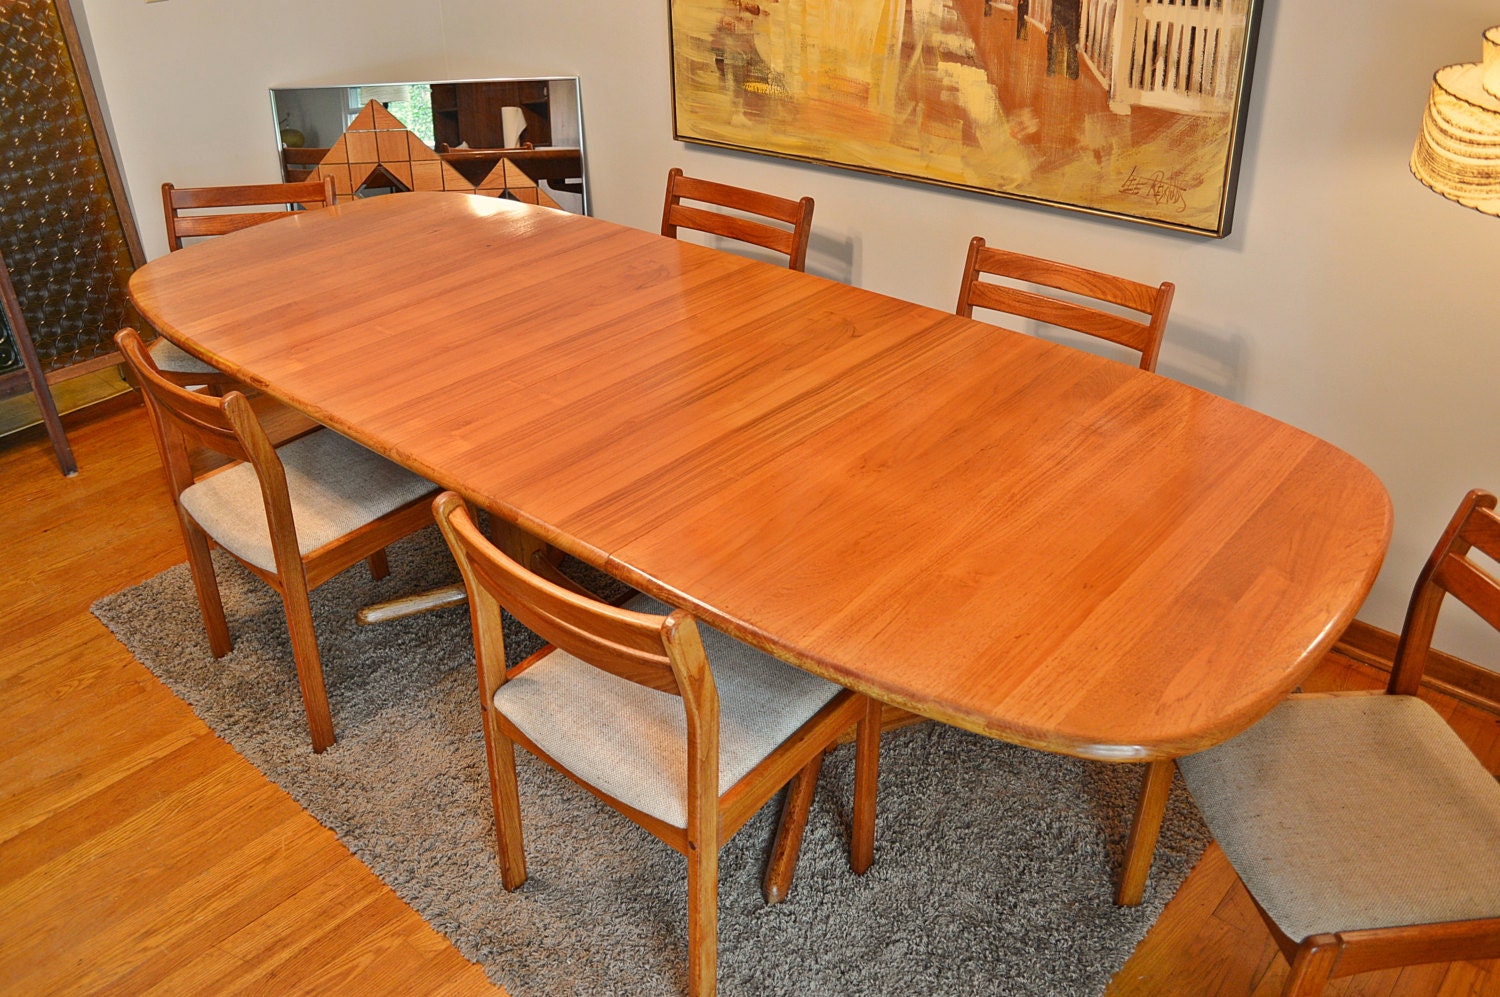 Teak Dining Room Table And Chairs For Sale